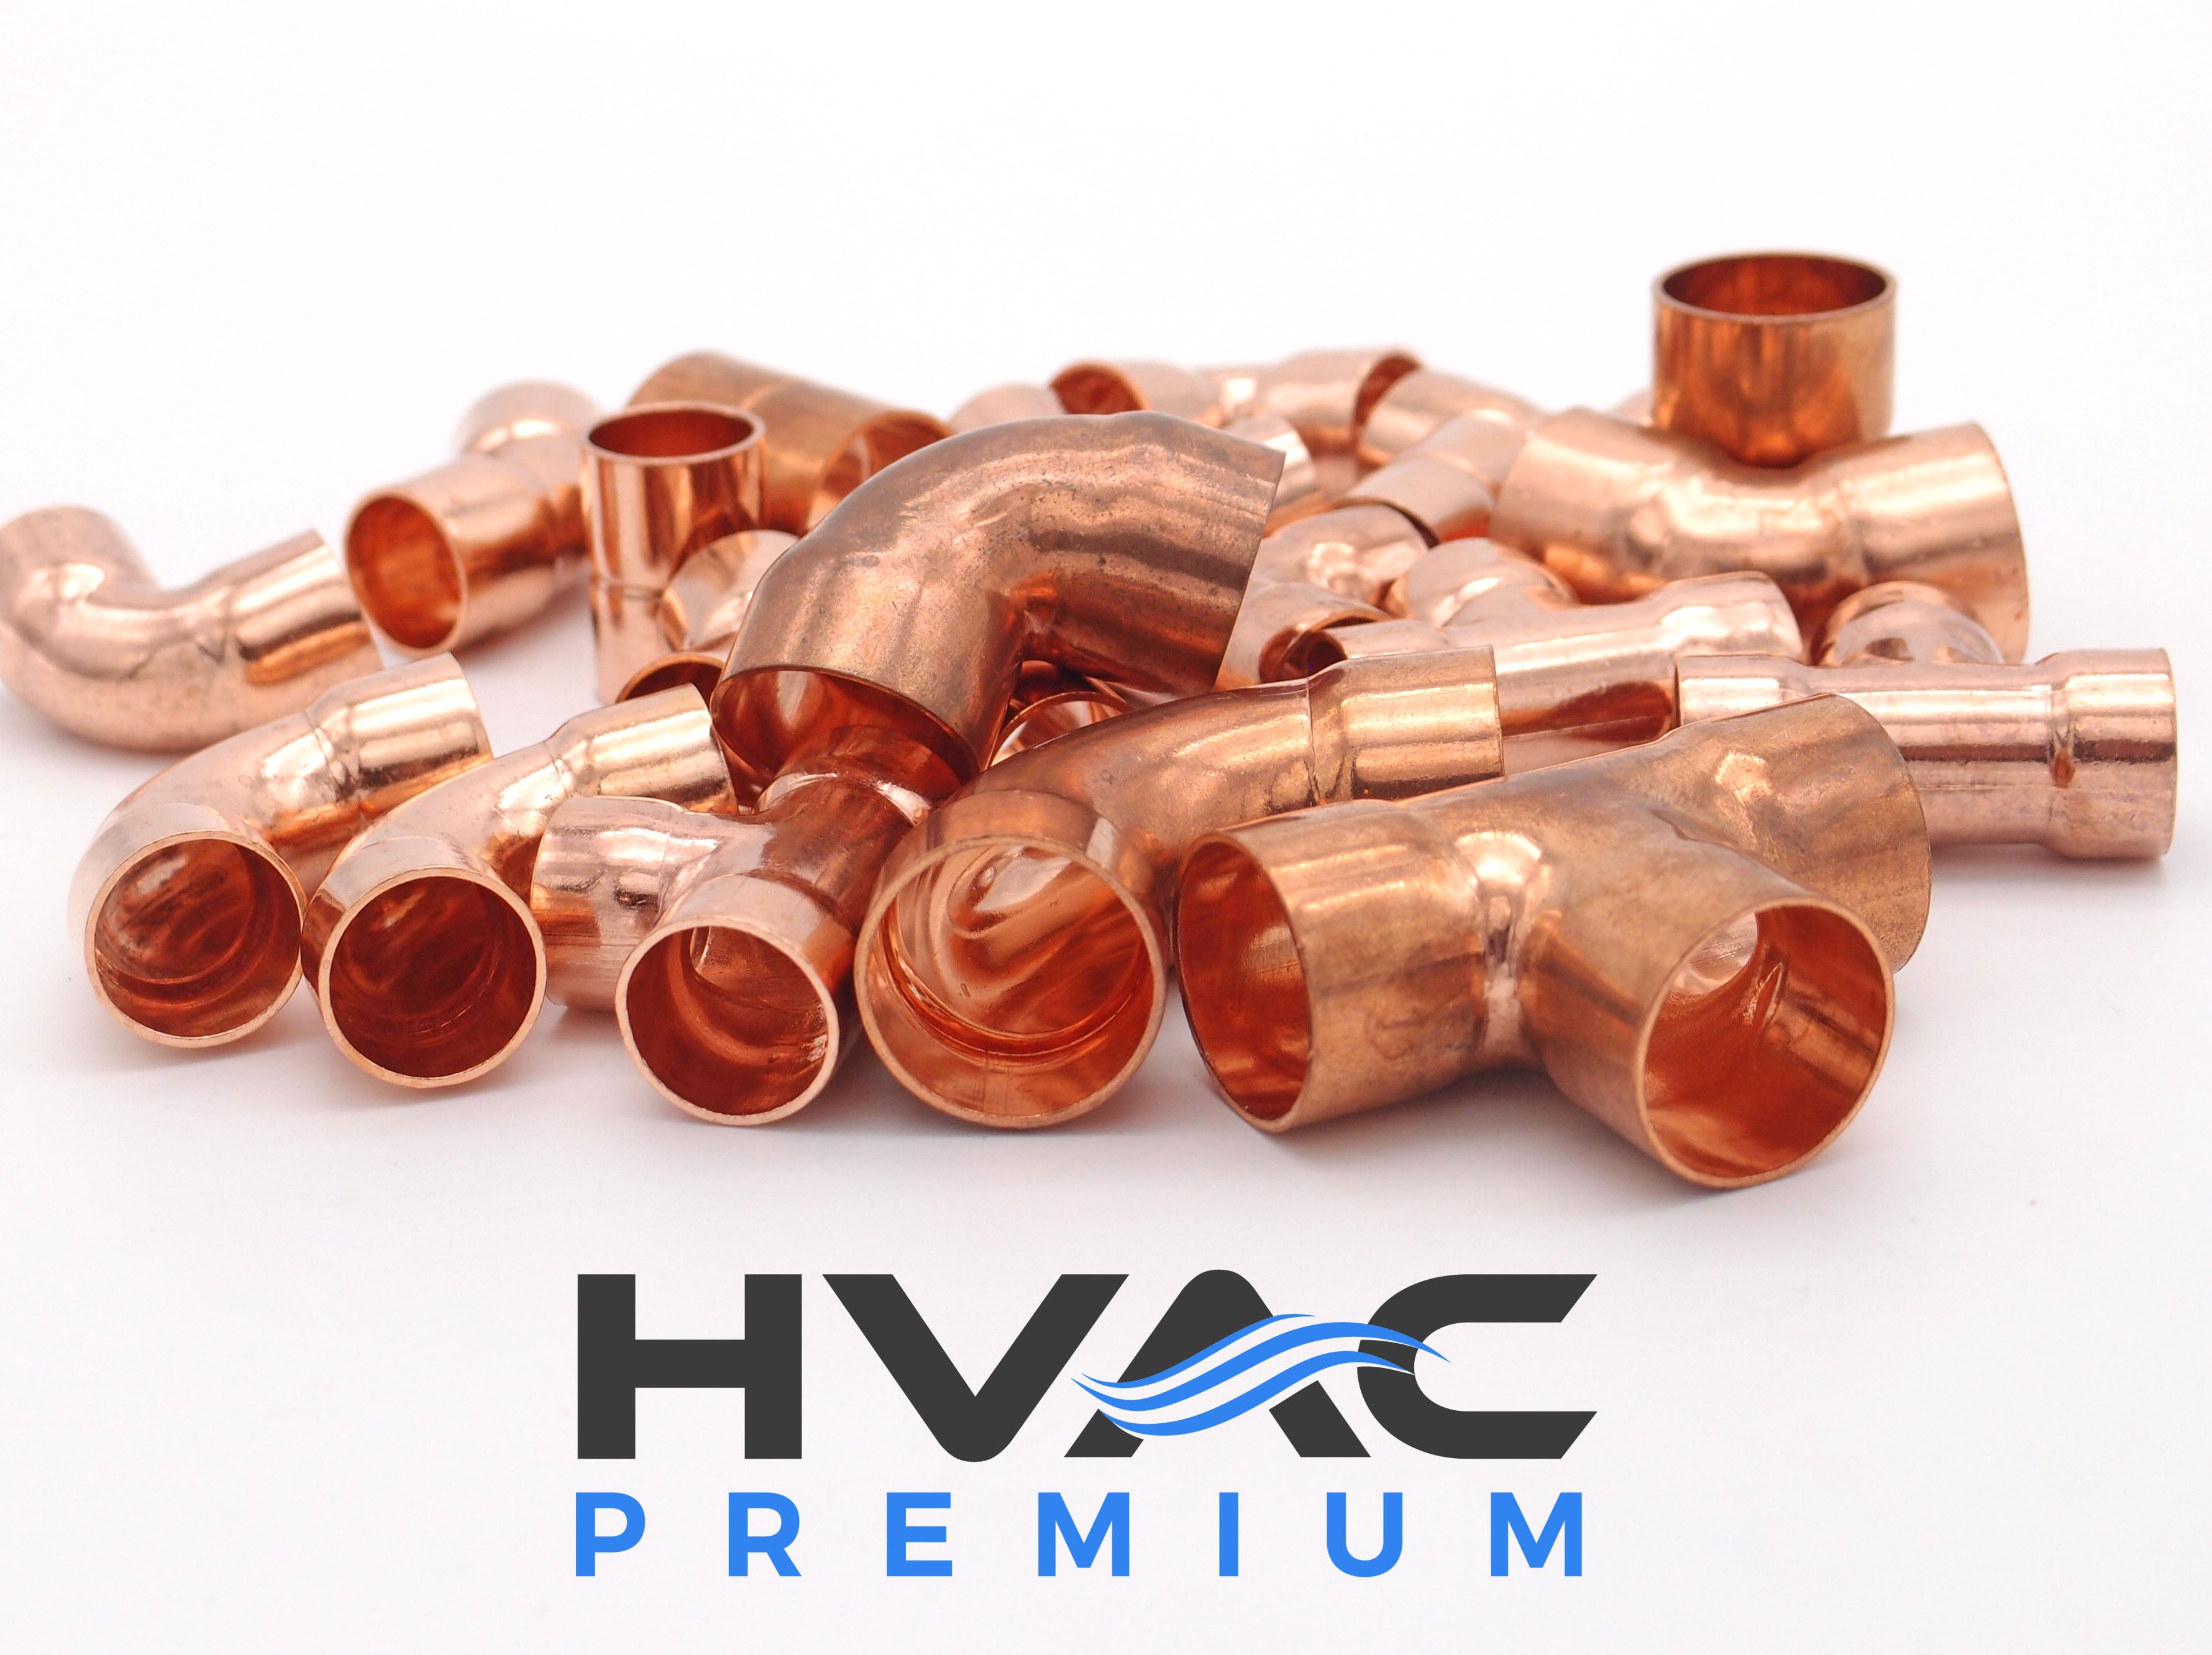 Copper Fitting 1/4 Inch (HVAC Outer Dimension) 1/8 Inch (Plumbing Inner Dimension) - Copper Long Radius 90° Elbow Fitting with 2 Solder Cups & HVAC – 99.9% Pure Copper - 10 Pack